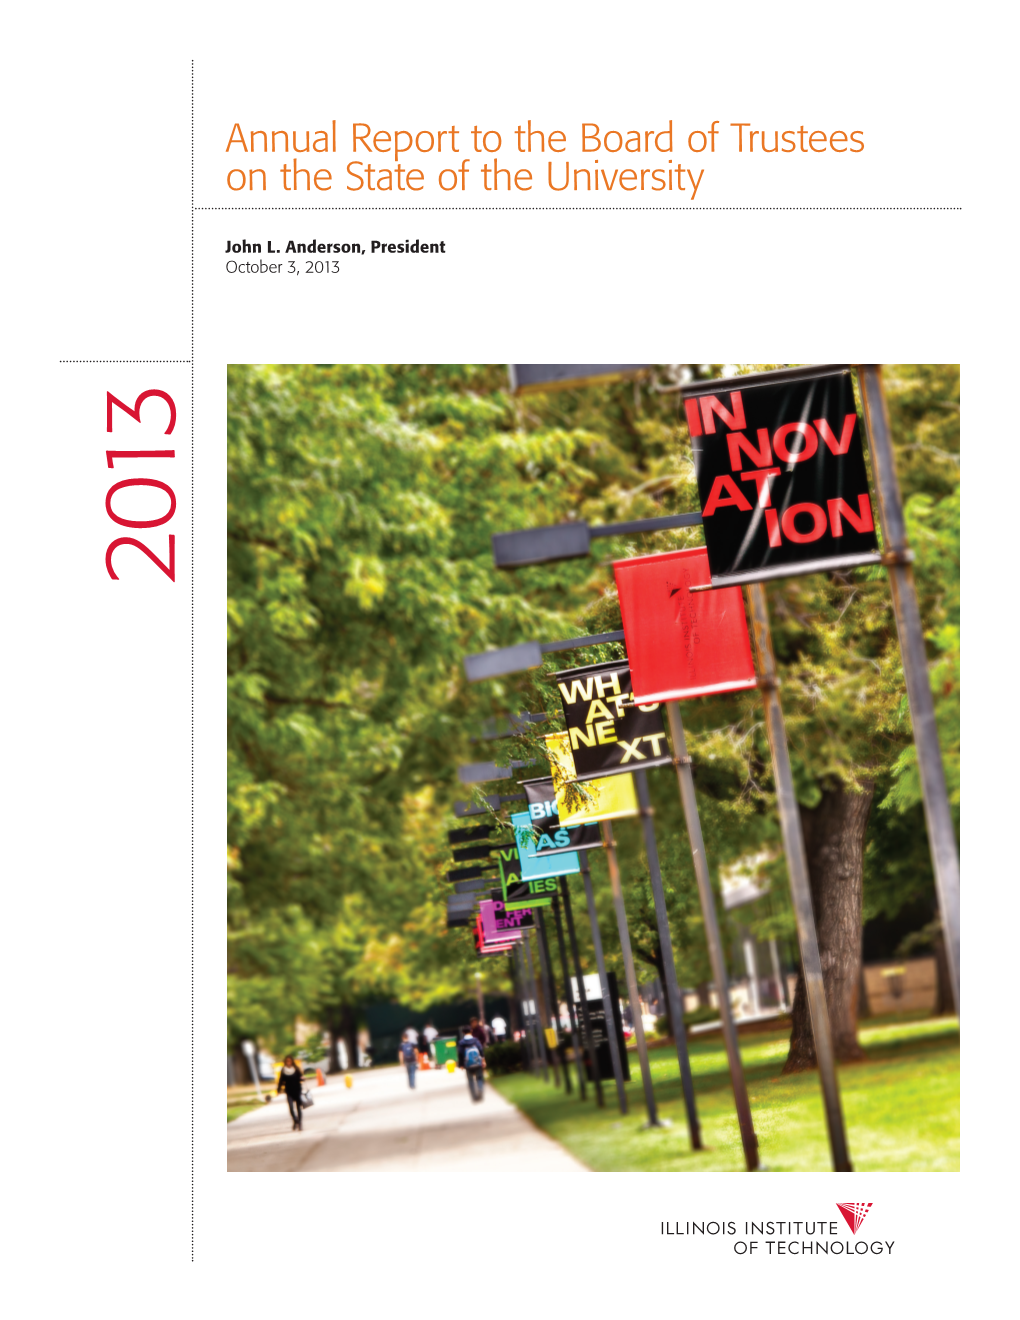 Annual Report to the Board of Trustees on the State of the University